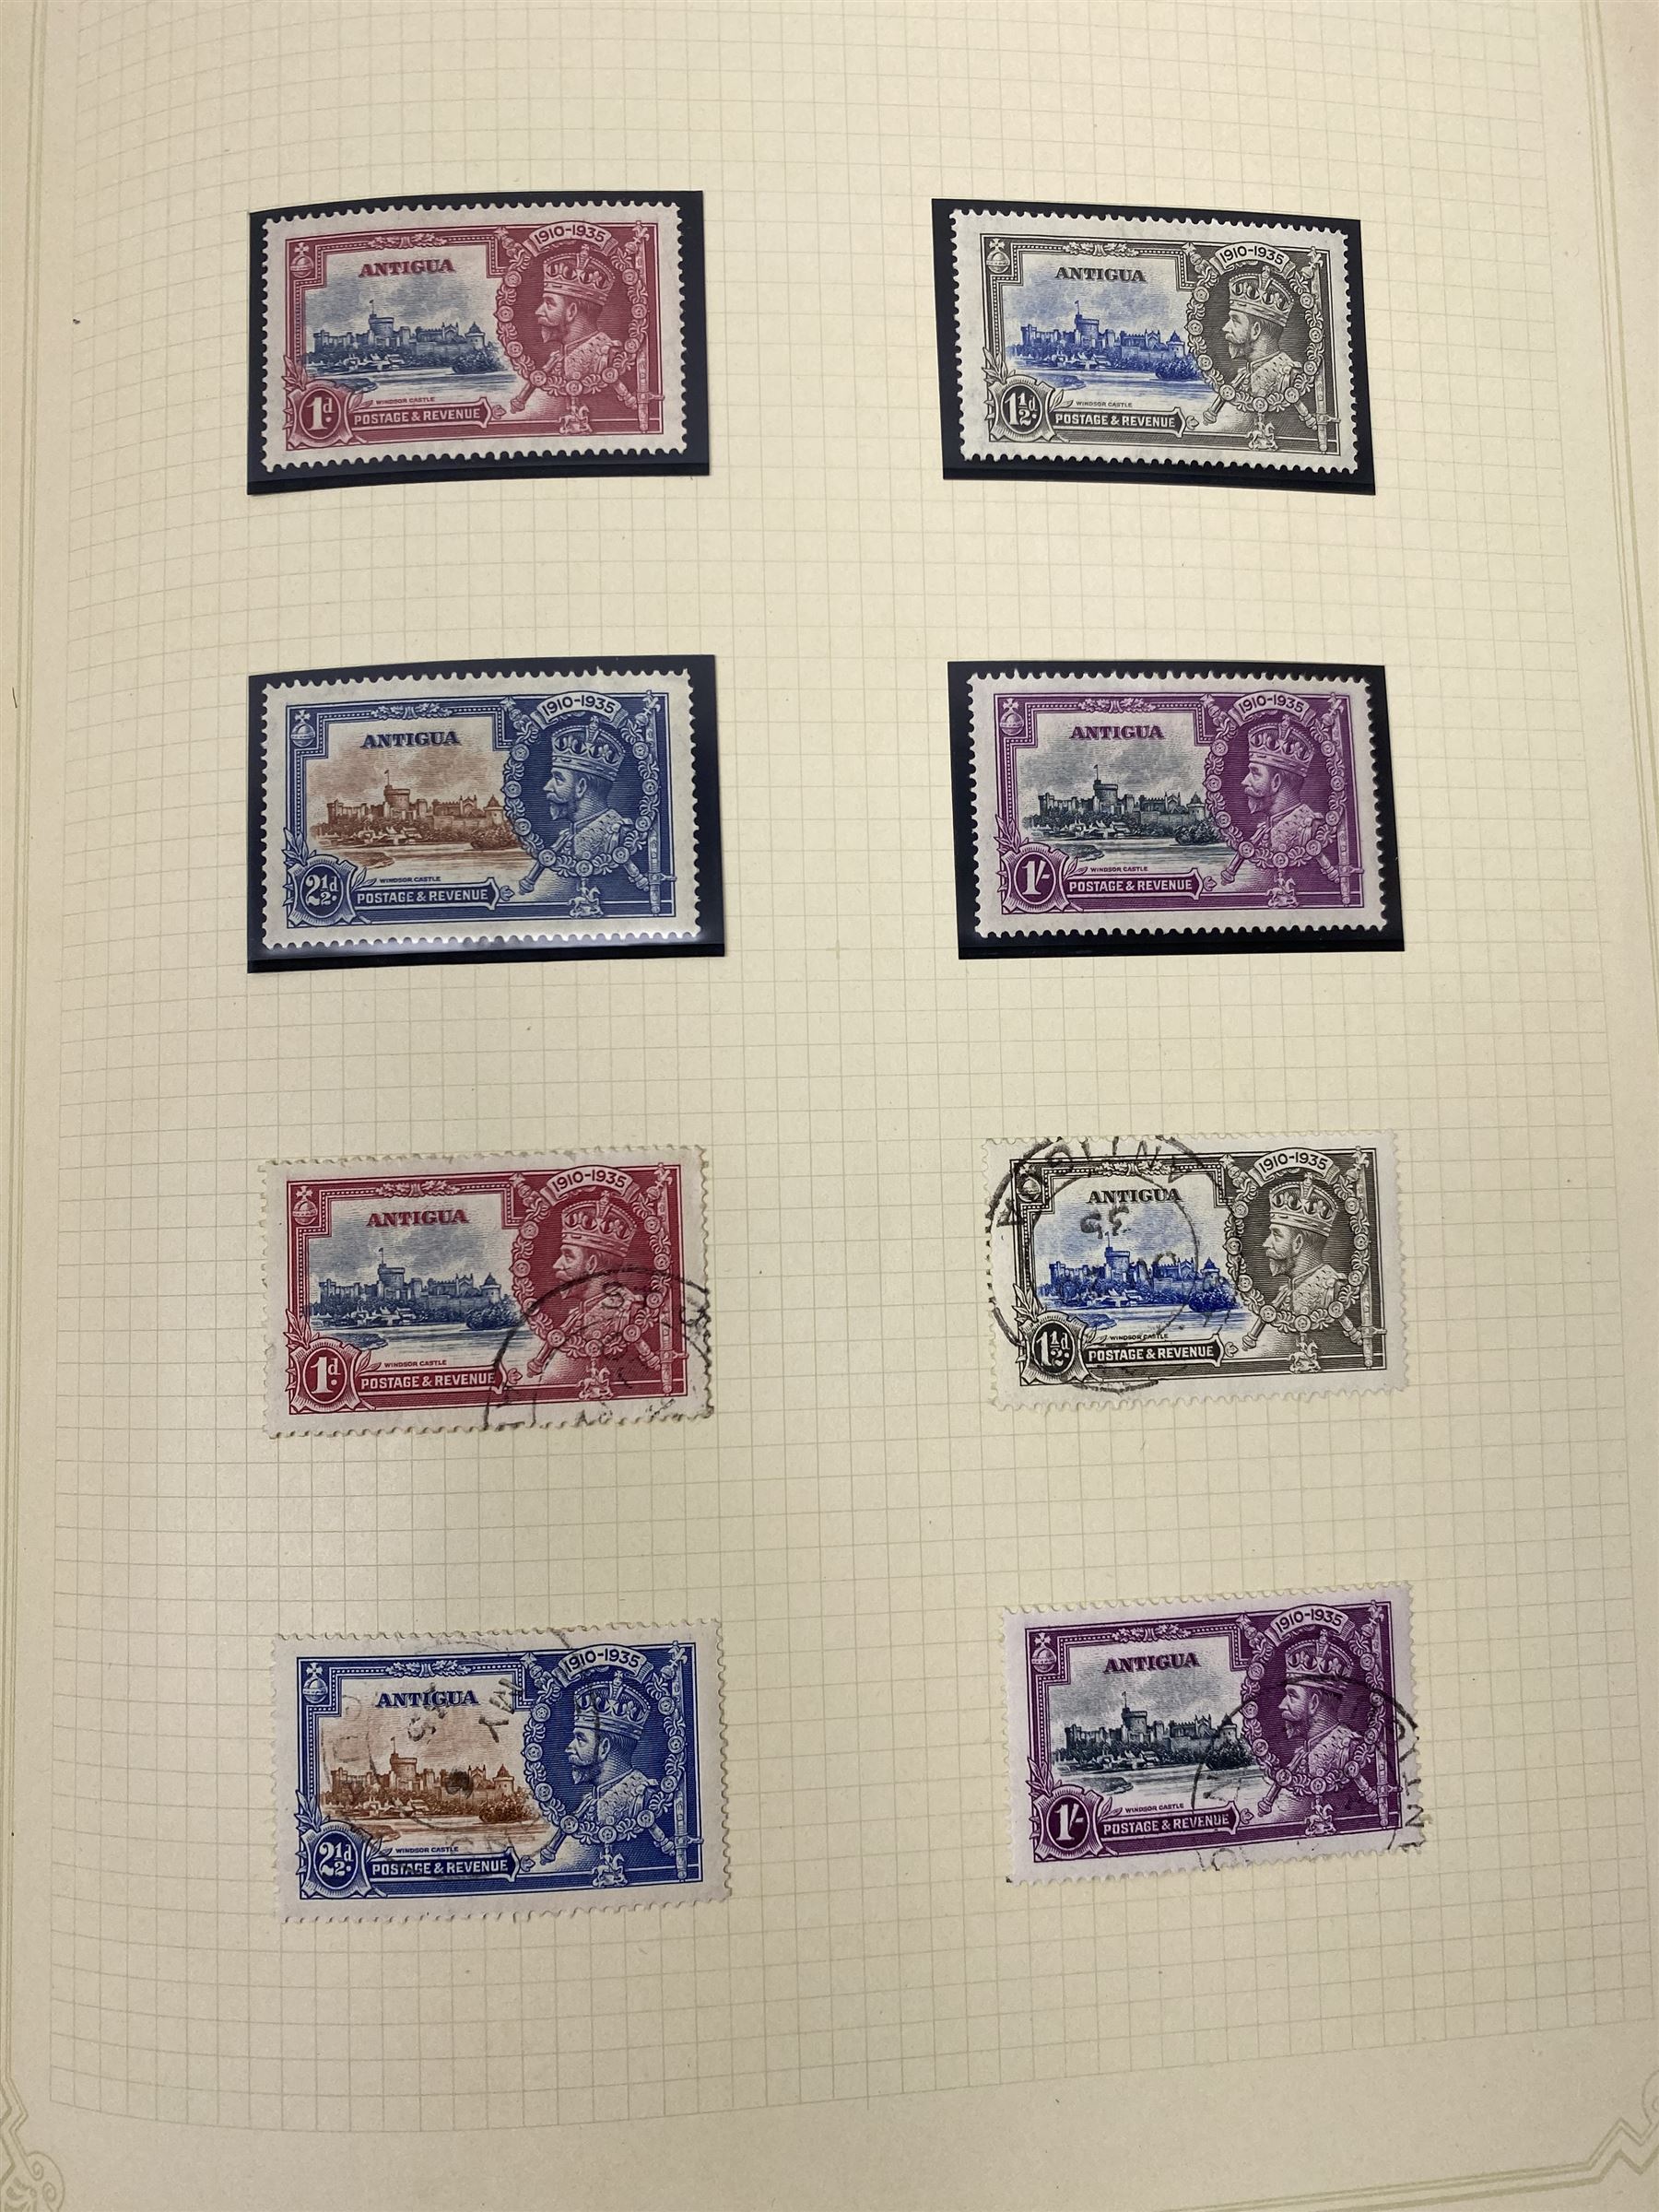 King George V 1935 Silver Jubilee stamps - Image 4 of 17